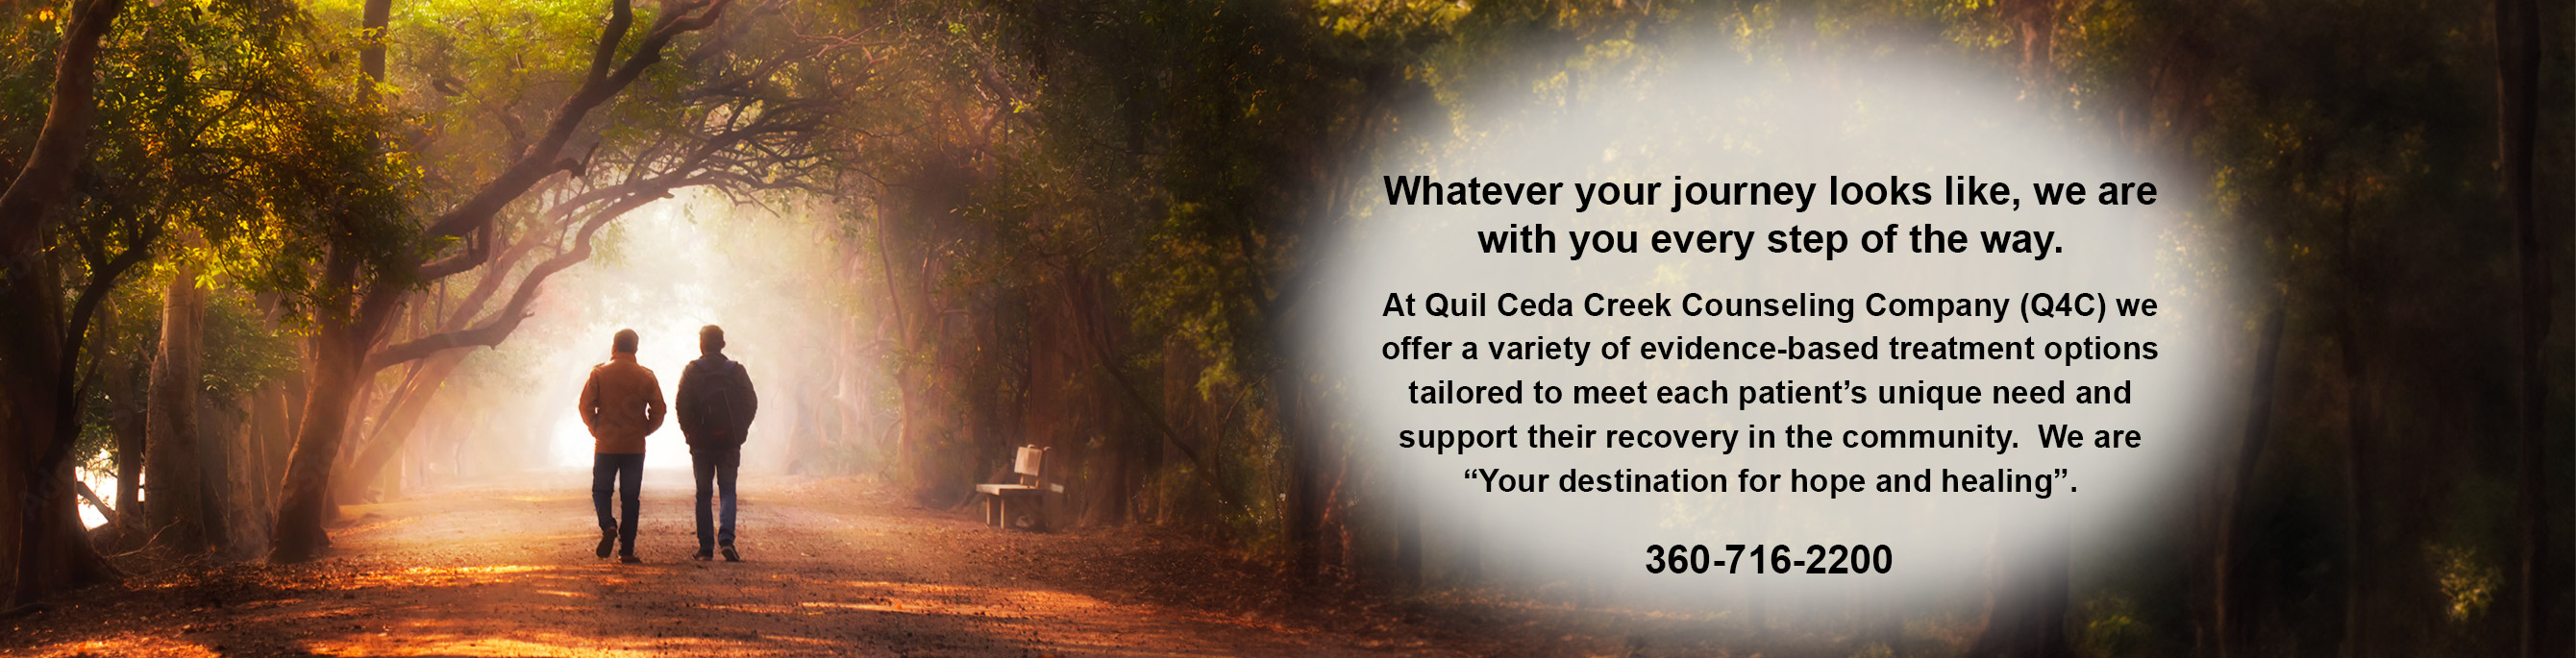 Whatever your journey looks like, we are with you every step of the way. At Quil Ceda Creek Counseling Company (Q4C) we offer a variety of evidence-based treatment ptions
    tailored to meet each patient’s unique need and support their recovery in the community. We are 'Your destination for hope and healing'. 360-716-2200